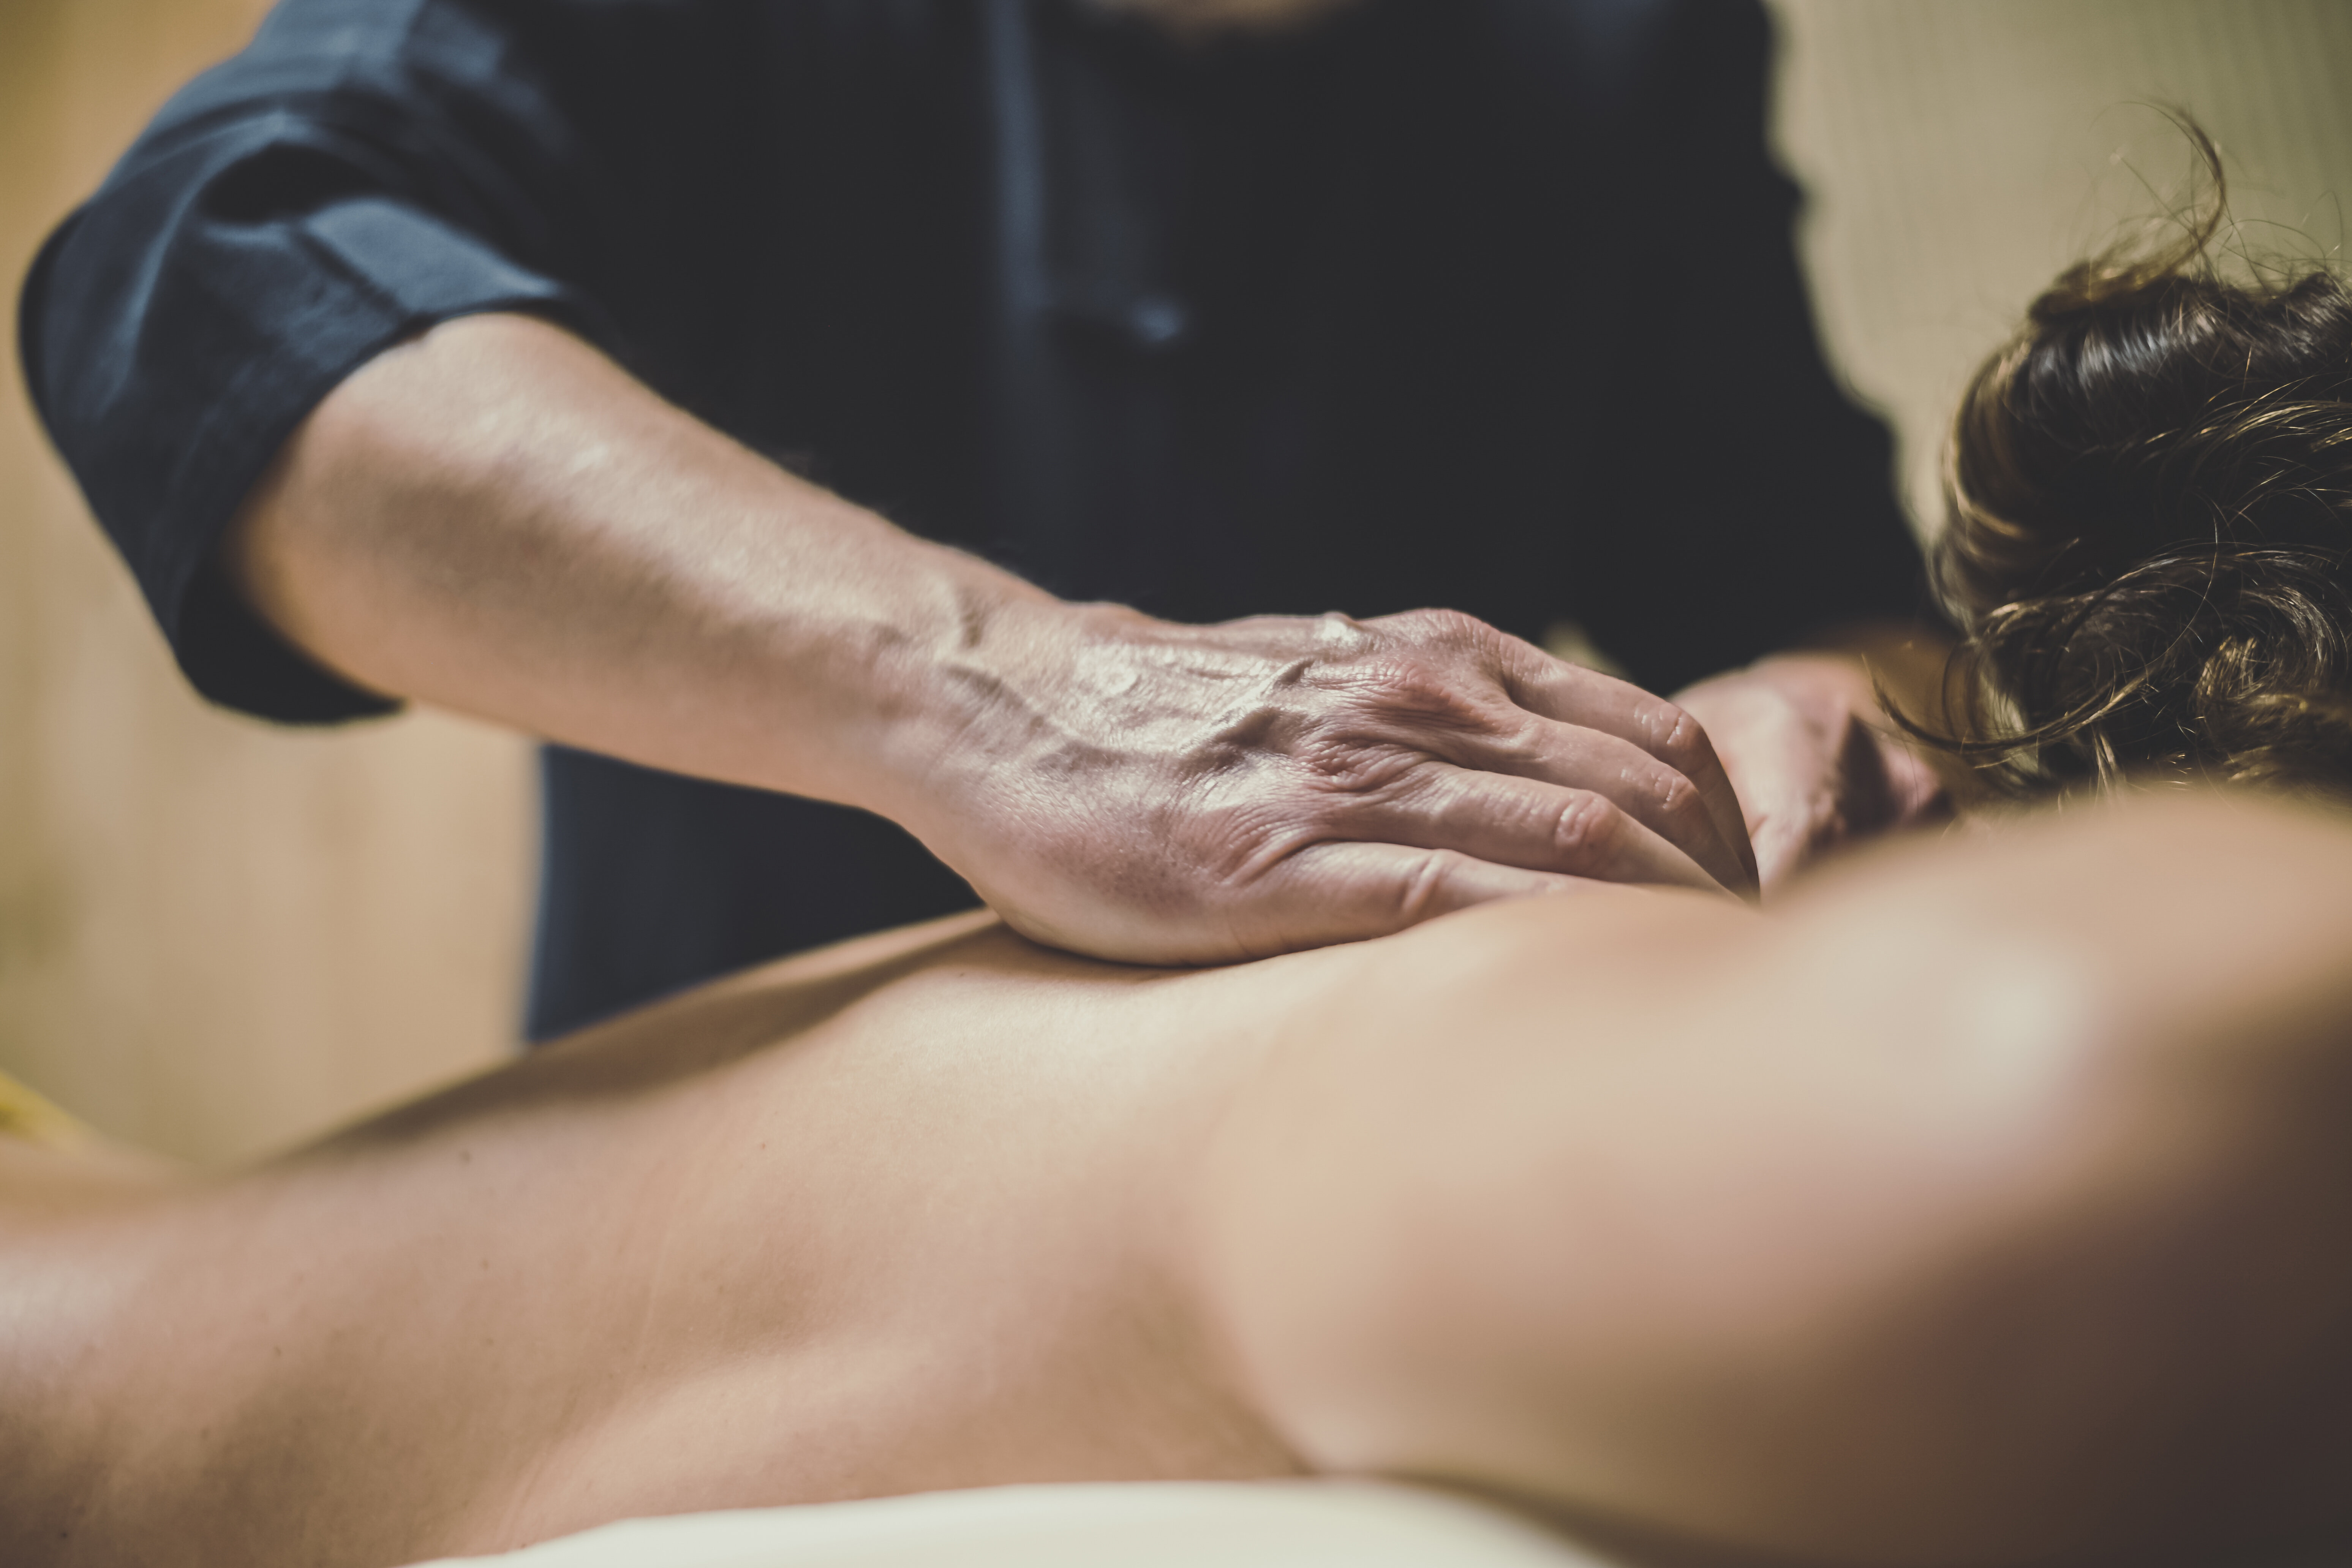 Happy Ending Massage My Experience As A Middle-Aged Woman HuffPost HuffPost Personal image